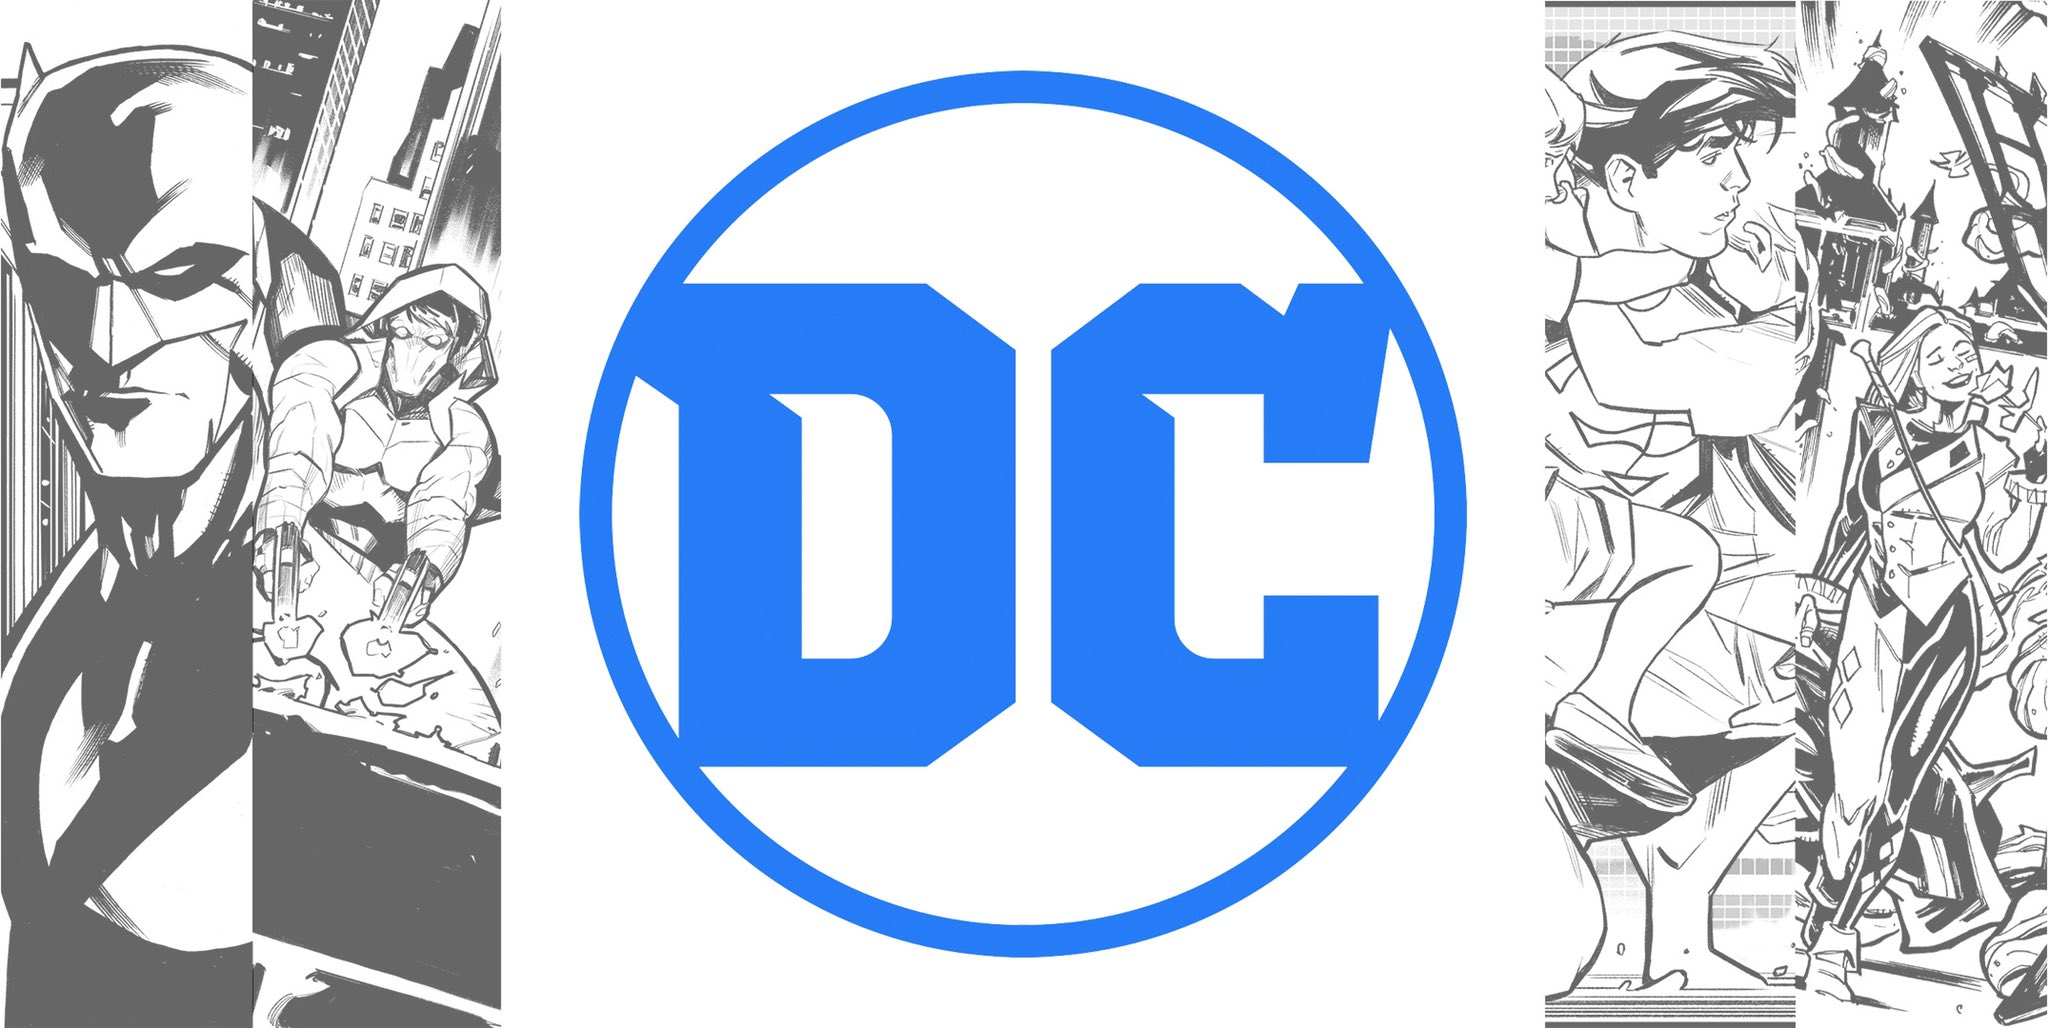 Cian Tormey signs exclusive contract with DC Comics